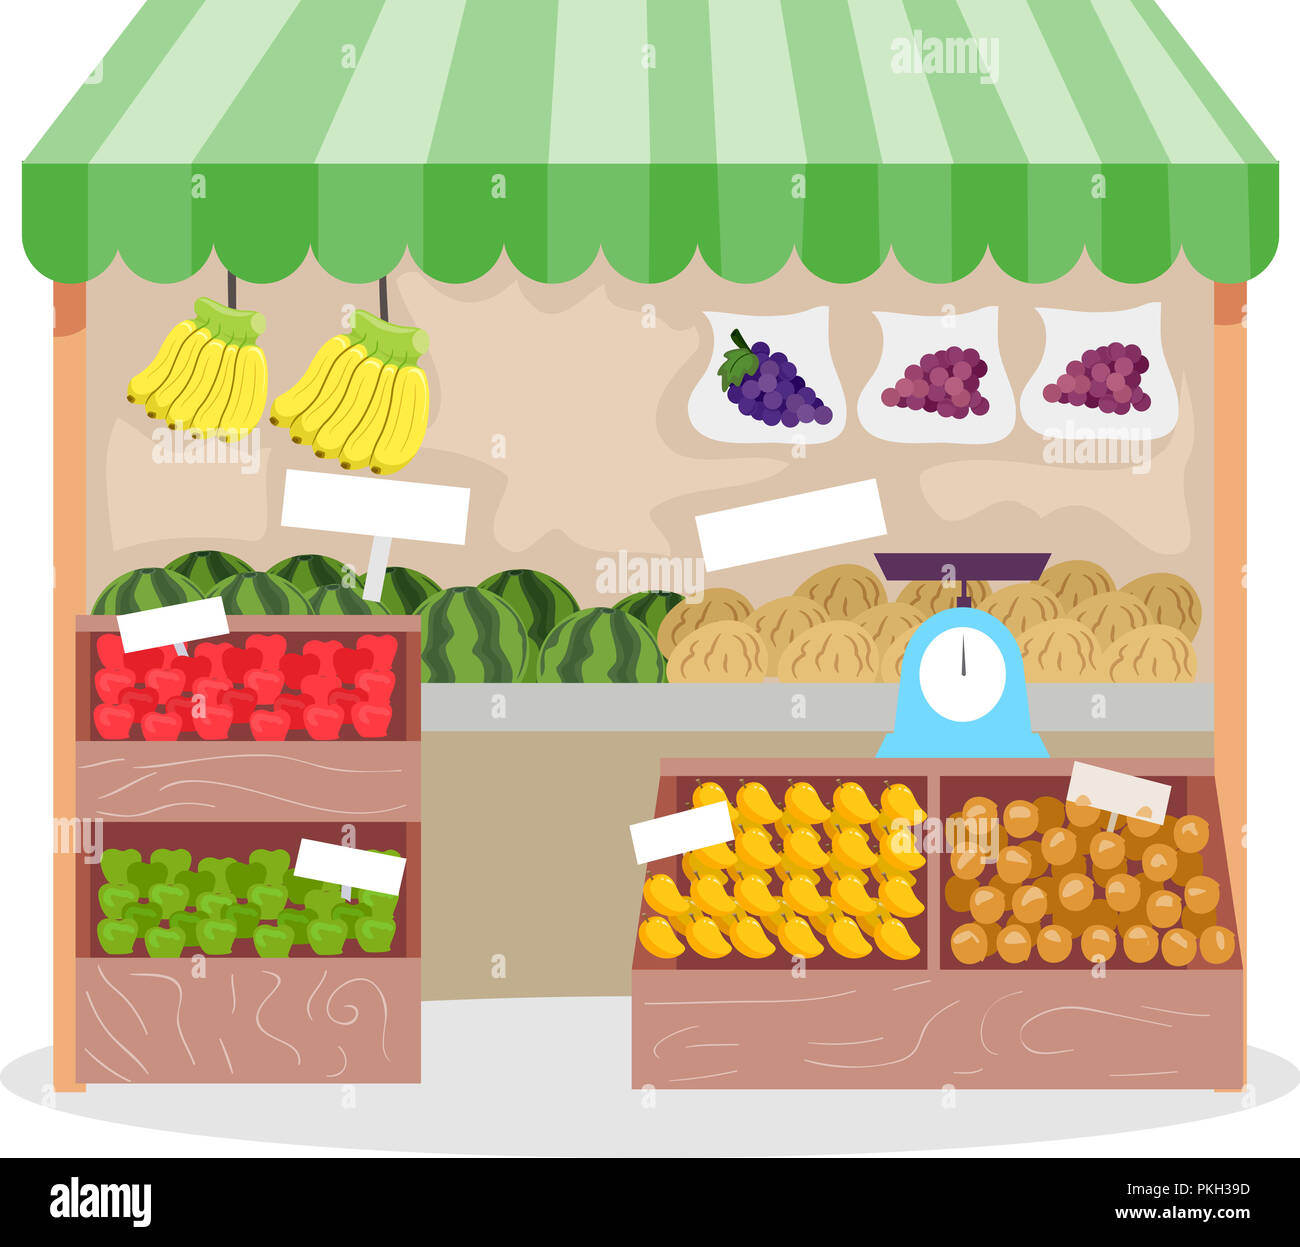 https://c8.alamy.com/comp/PKH39D/illustration-of-a-fruit-stand-with-several-fruits-and-a-weighing-scale-on-display-PKH39D.jpg